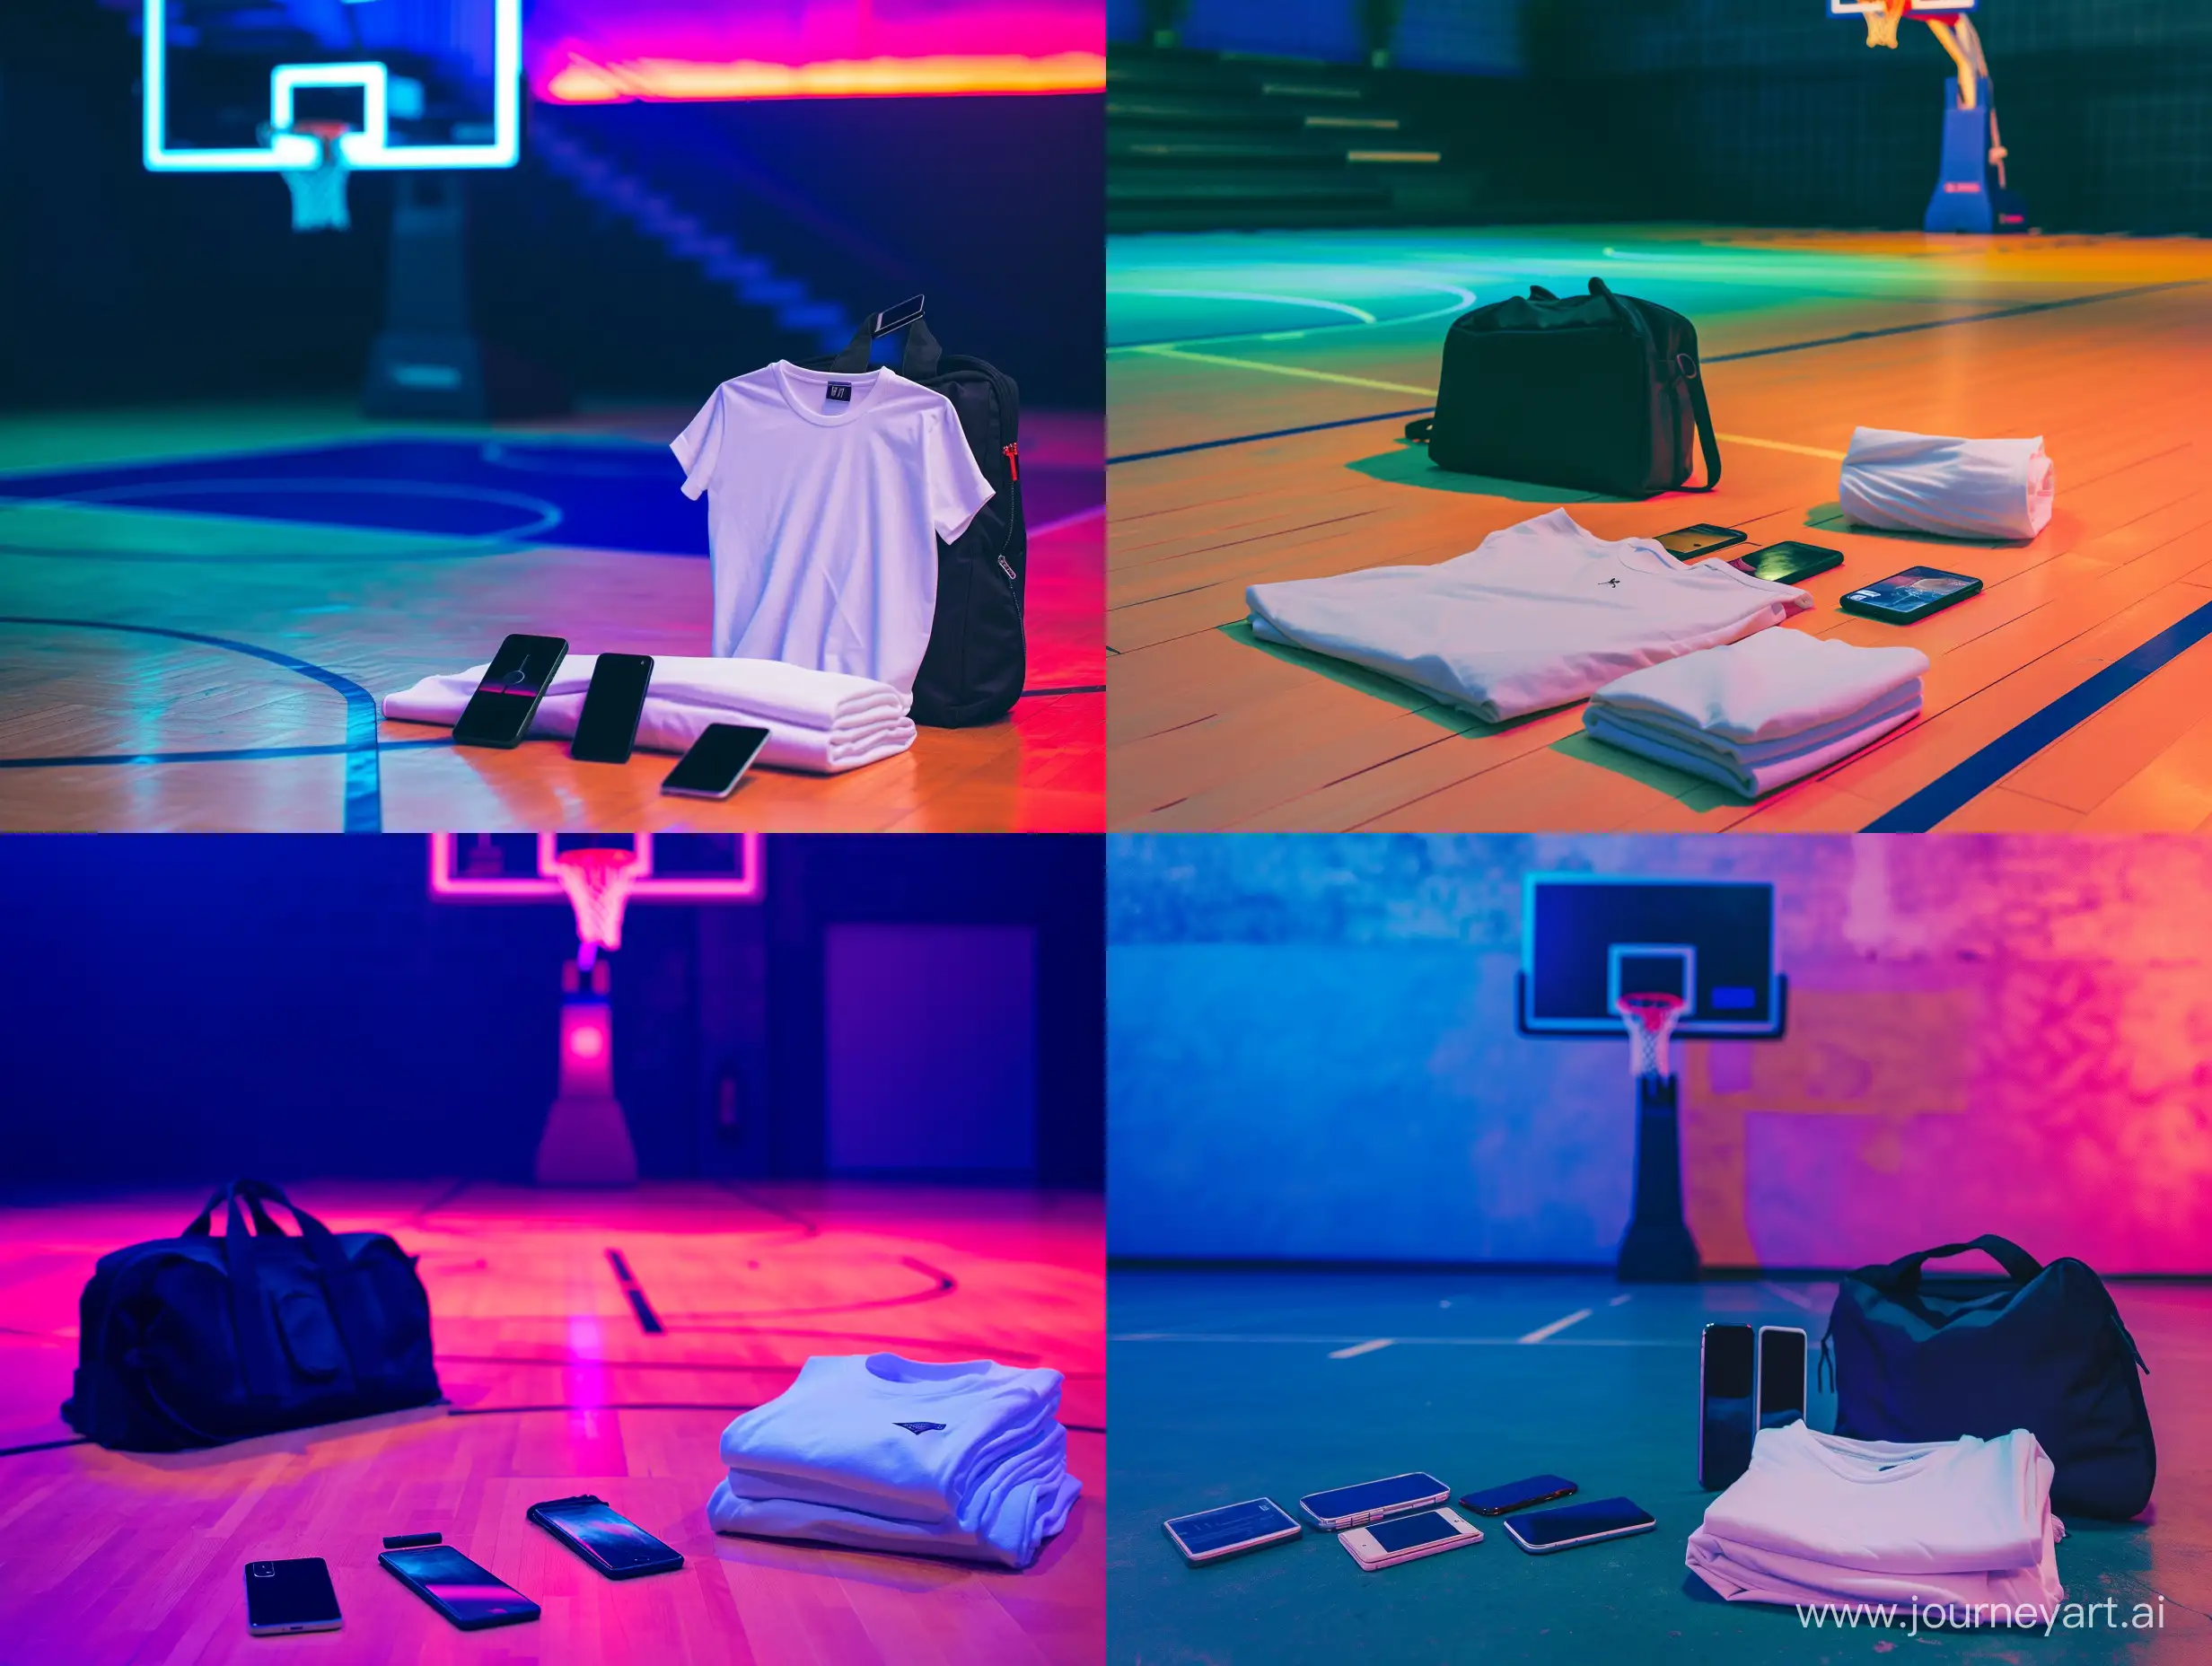 NeonColored-Basketball-Court-Scene-with-Folded-TShirt-and-Mobile-Phones